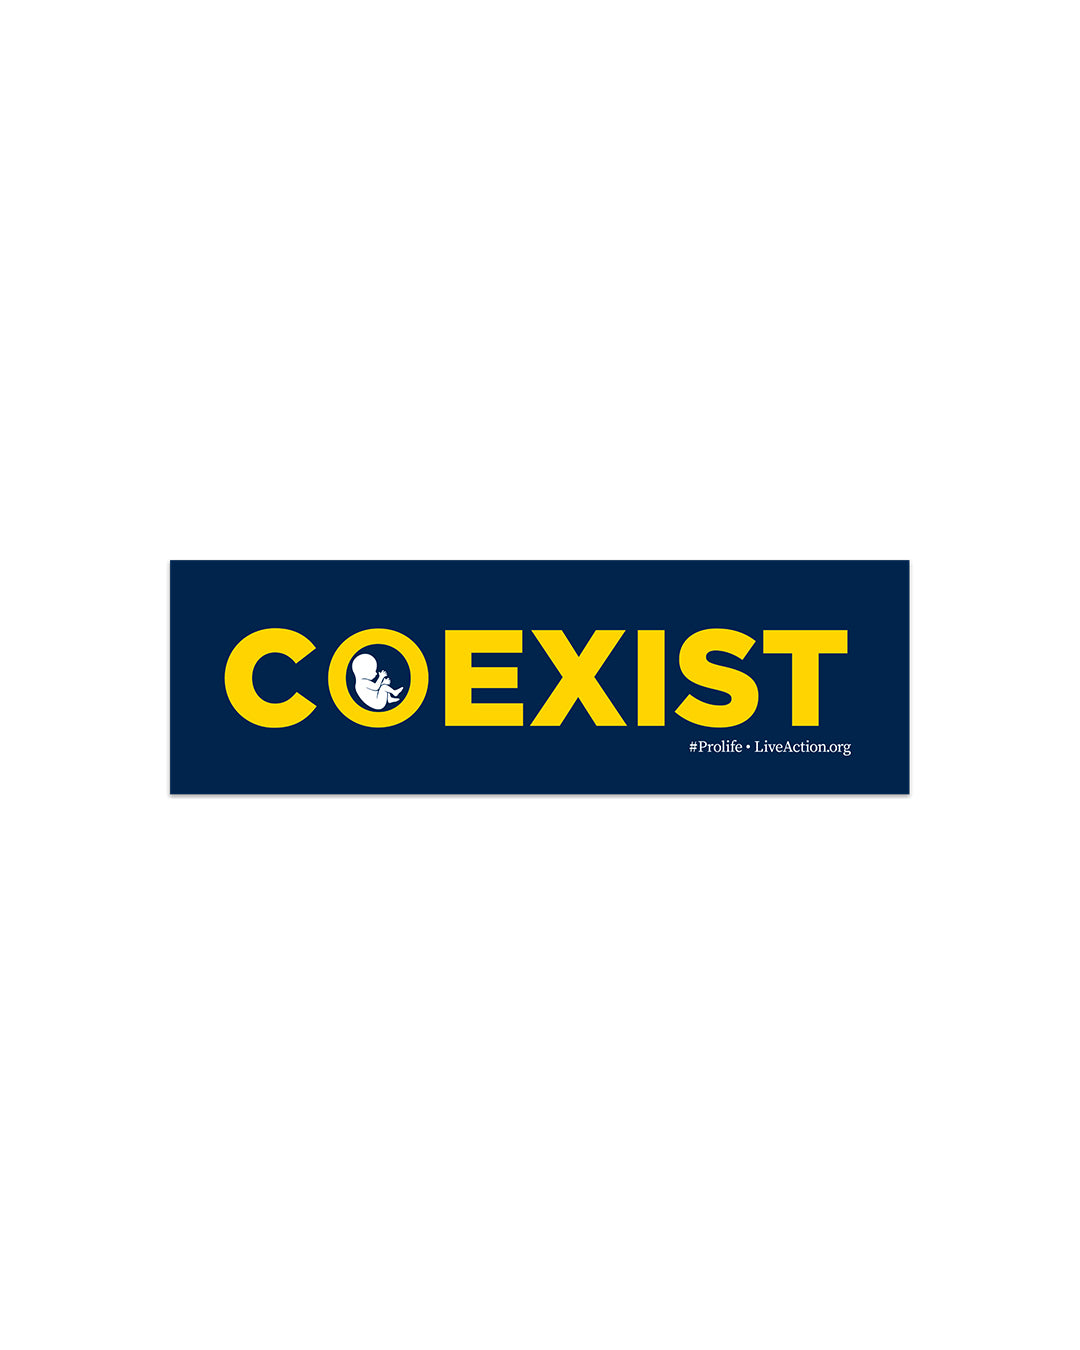 Navy blue rectangle bumper sticker with yellow font and the word "COEXIST" down the center. Inside the O is a white imprint of a preborn baby. In the bottom right hand corner in small, white print is the hashtag #ProLife and Live Action's website.